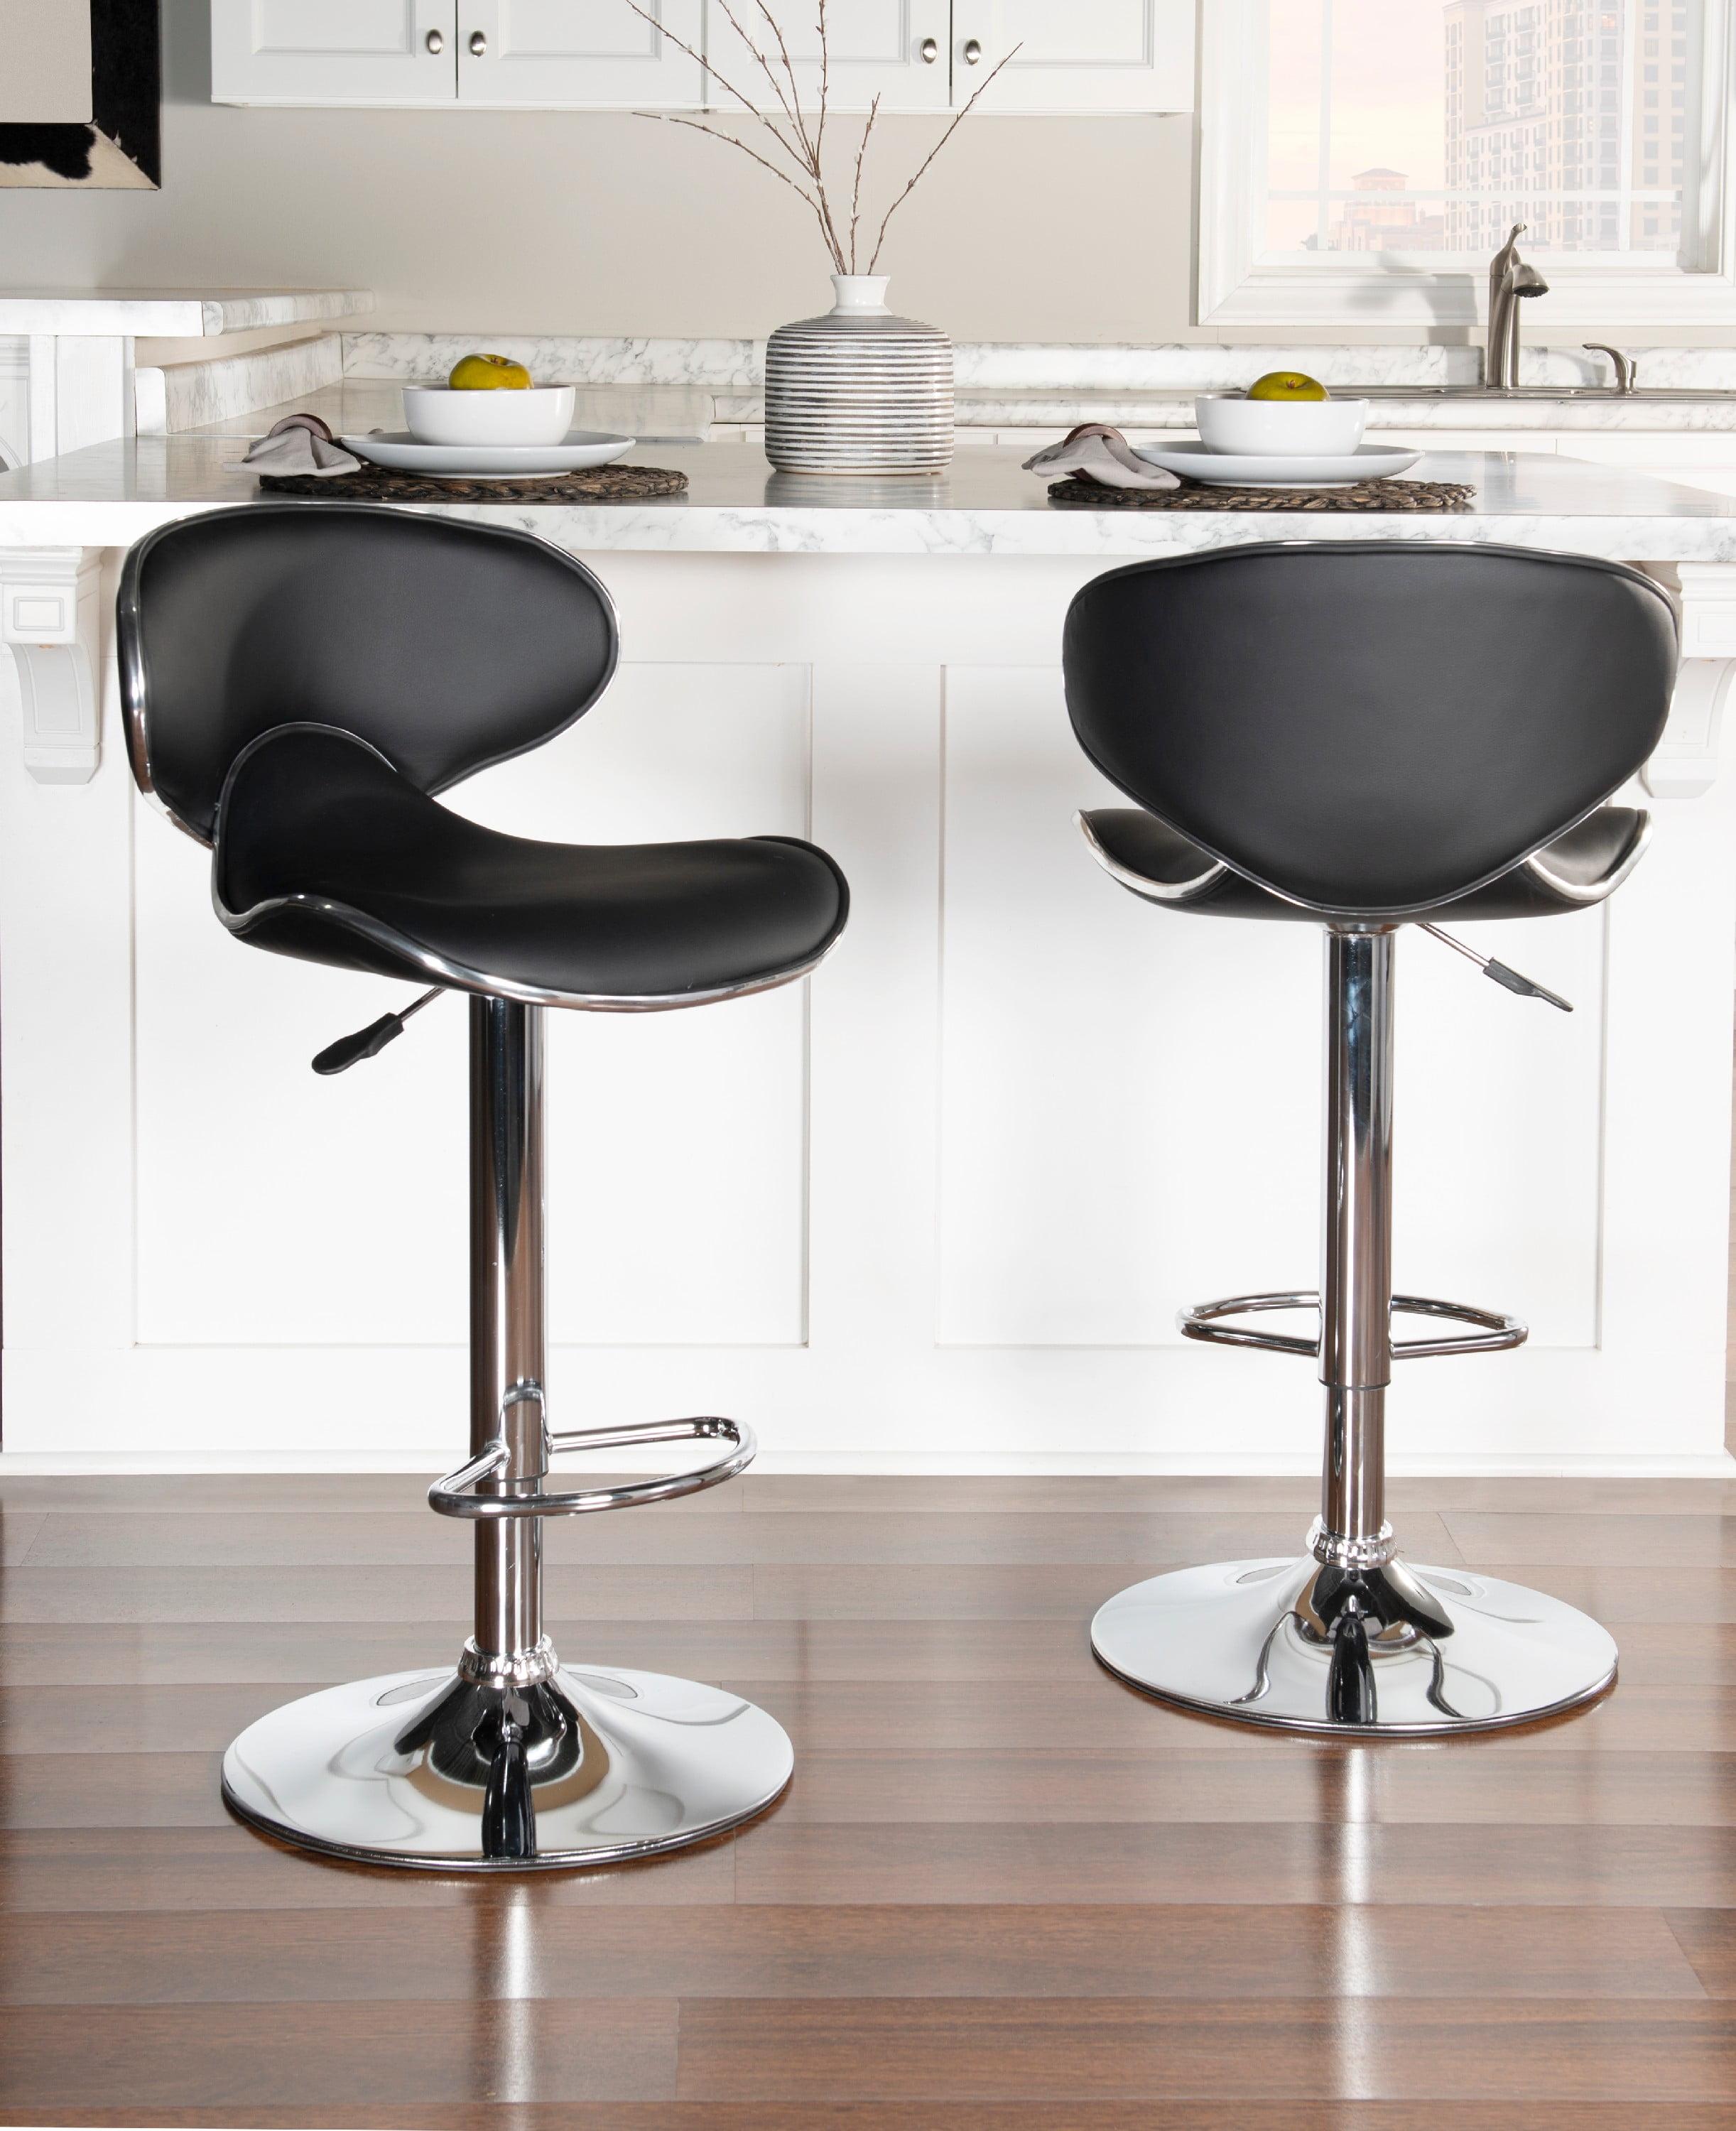 Adjustable Swivel Bar Stool in Black Faux Leather and Chrome